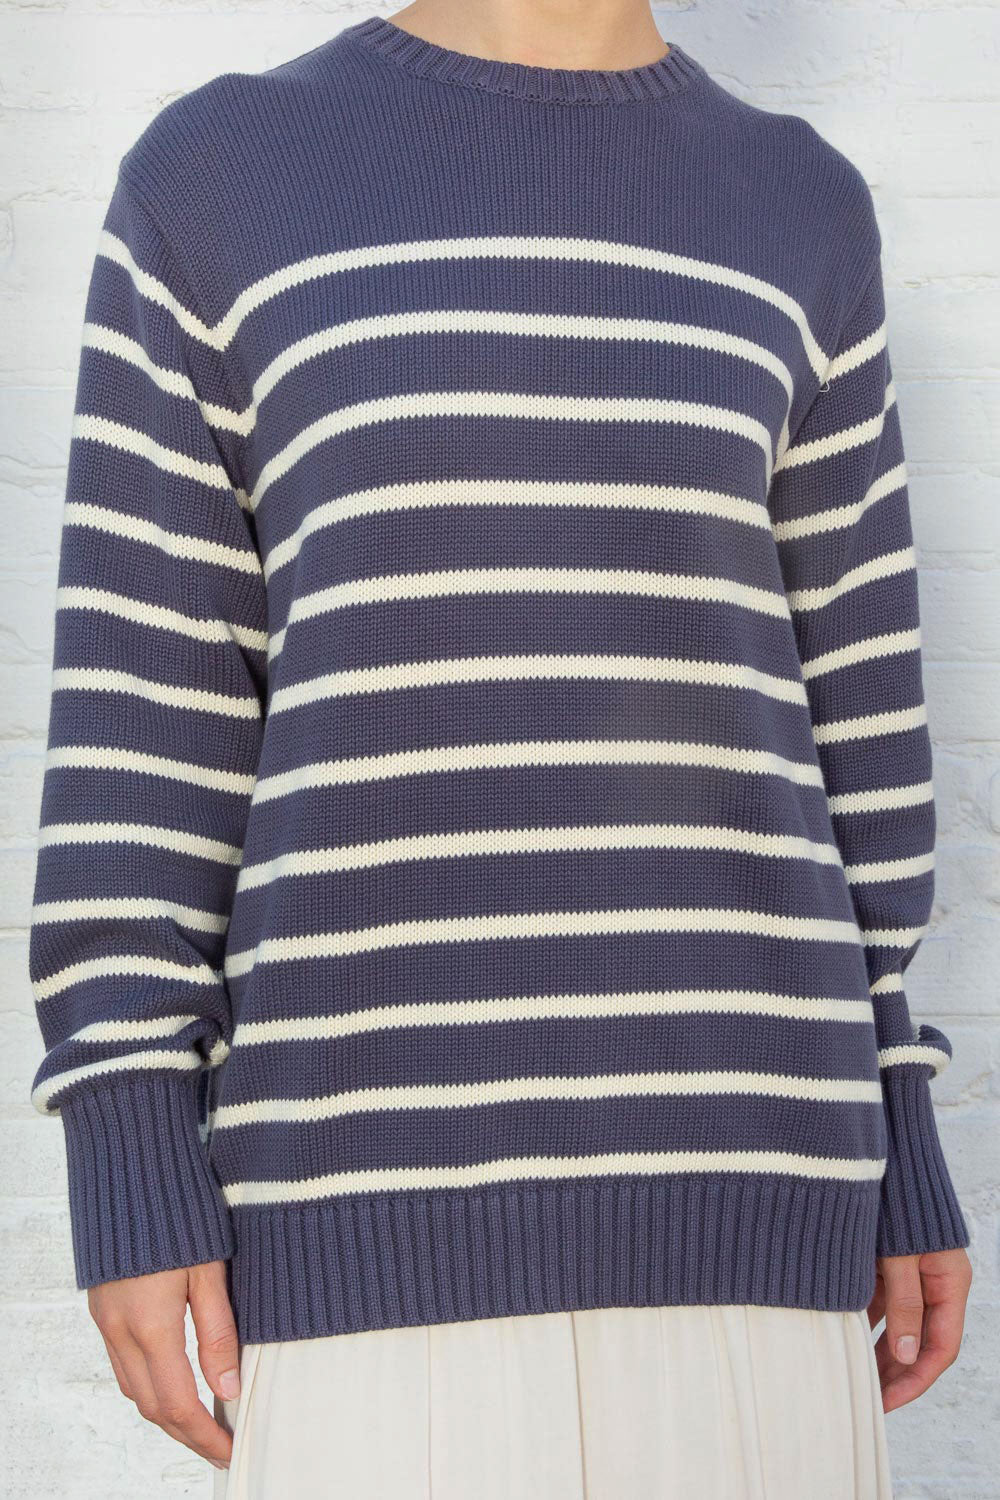 Faded Navy Blue with Thin White Stripes / Oversized Fit